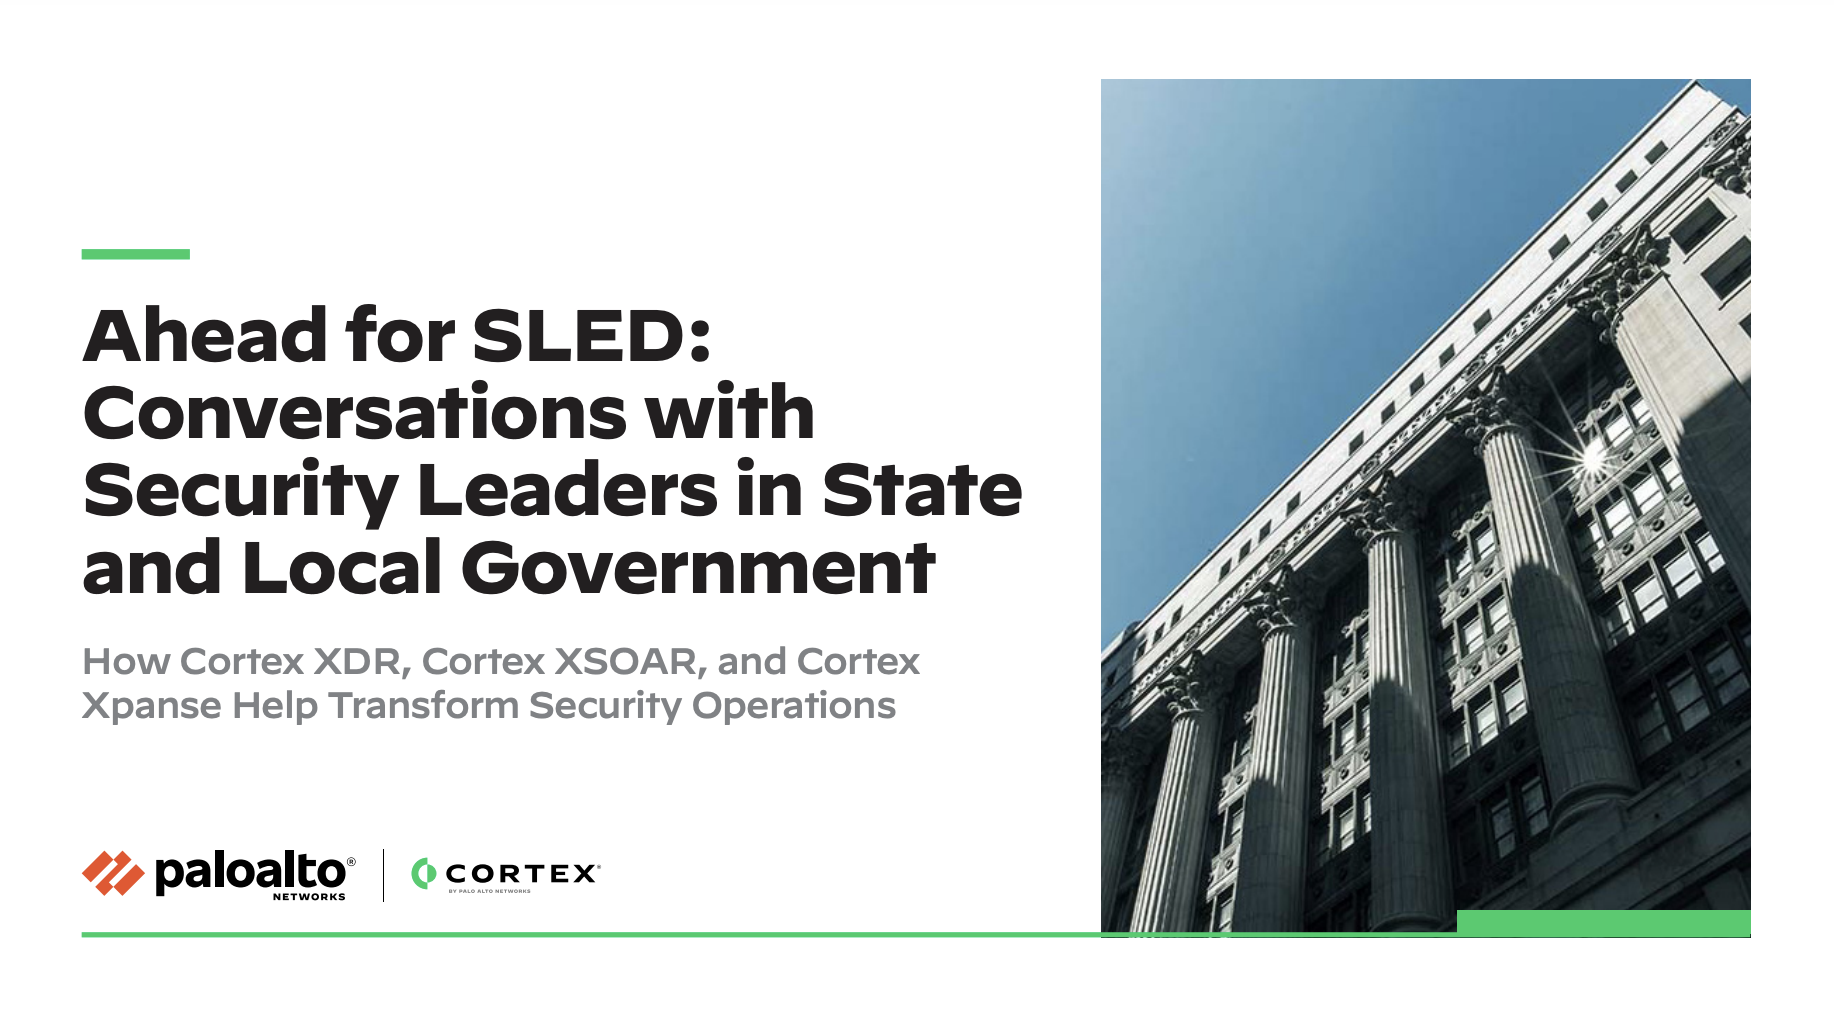 Ahead for SLED: Conversations with security leaders in state and local government